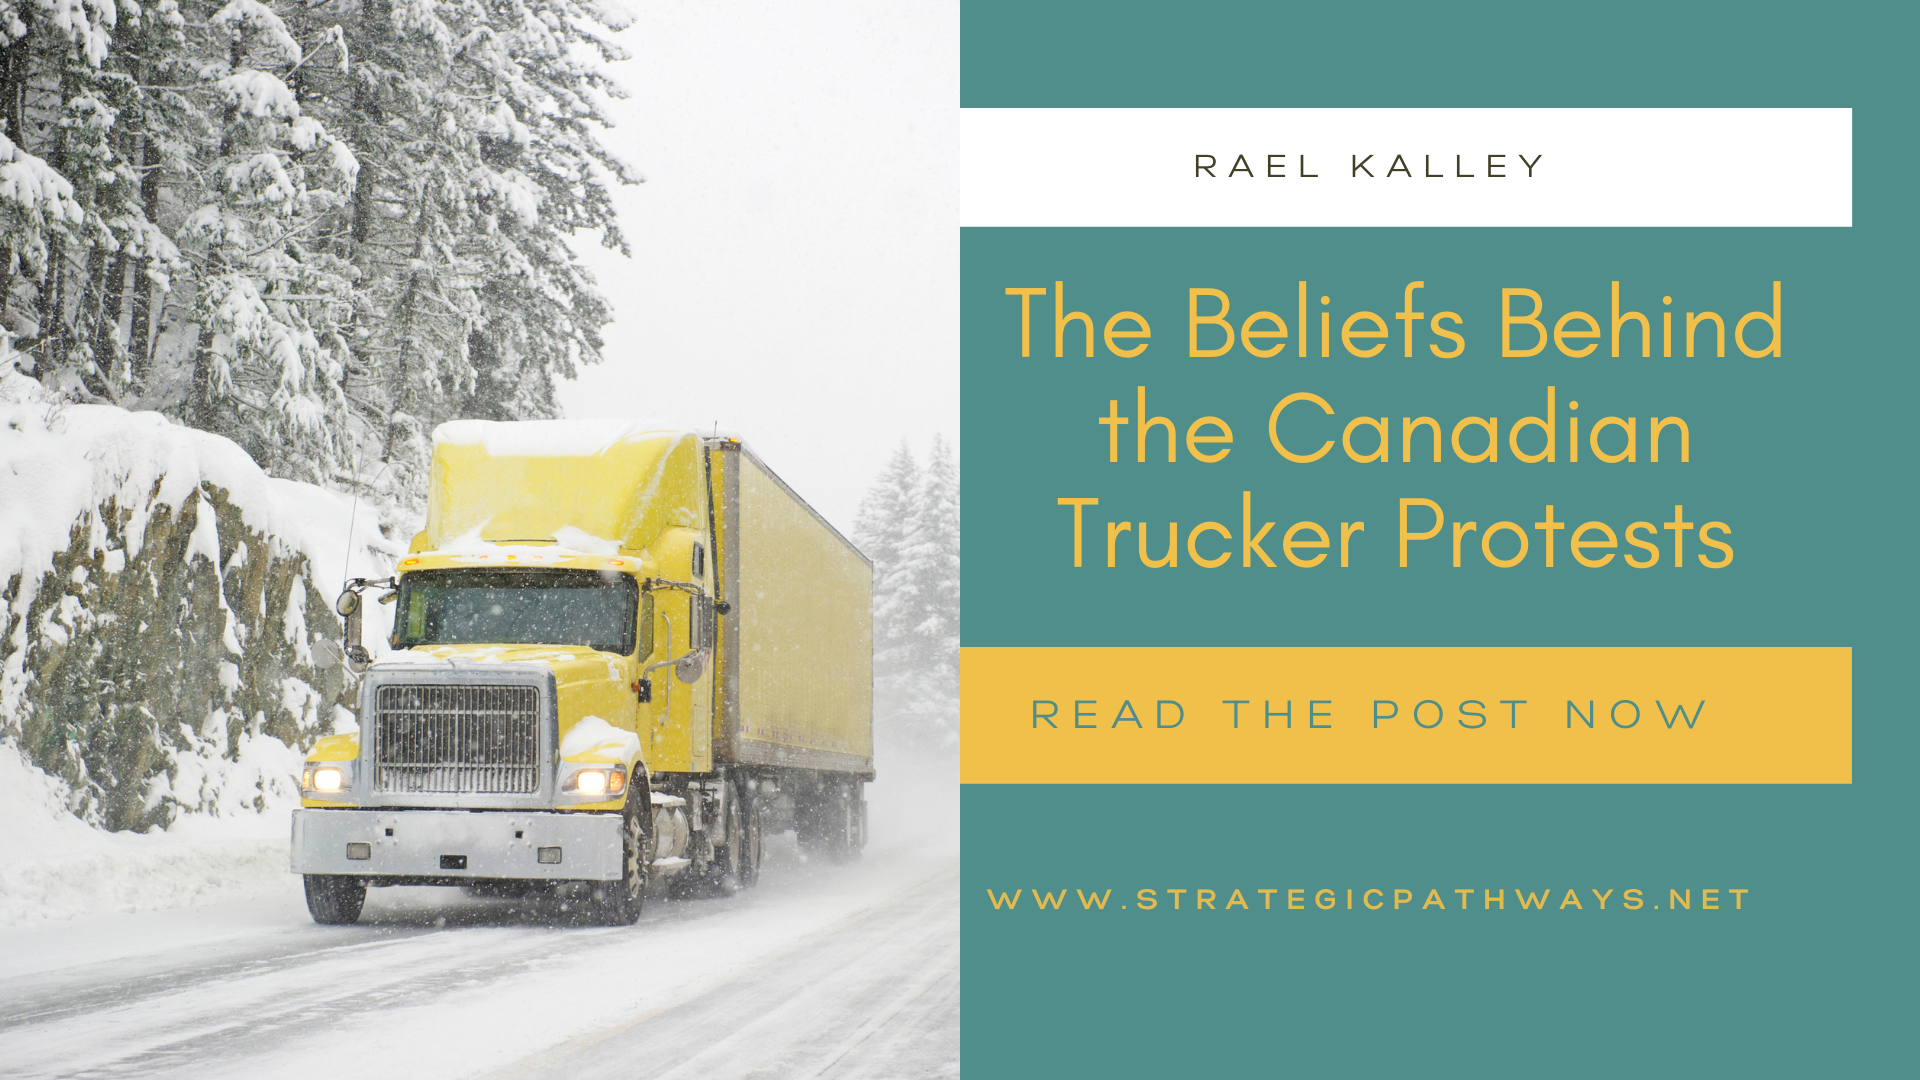 Text Says "The Beliefs Behind the Canadian Trucker Protests" and image is a truck in the snow